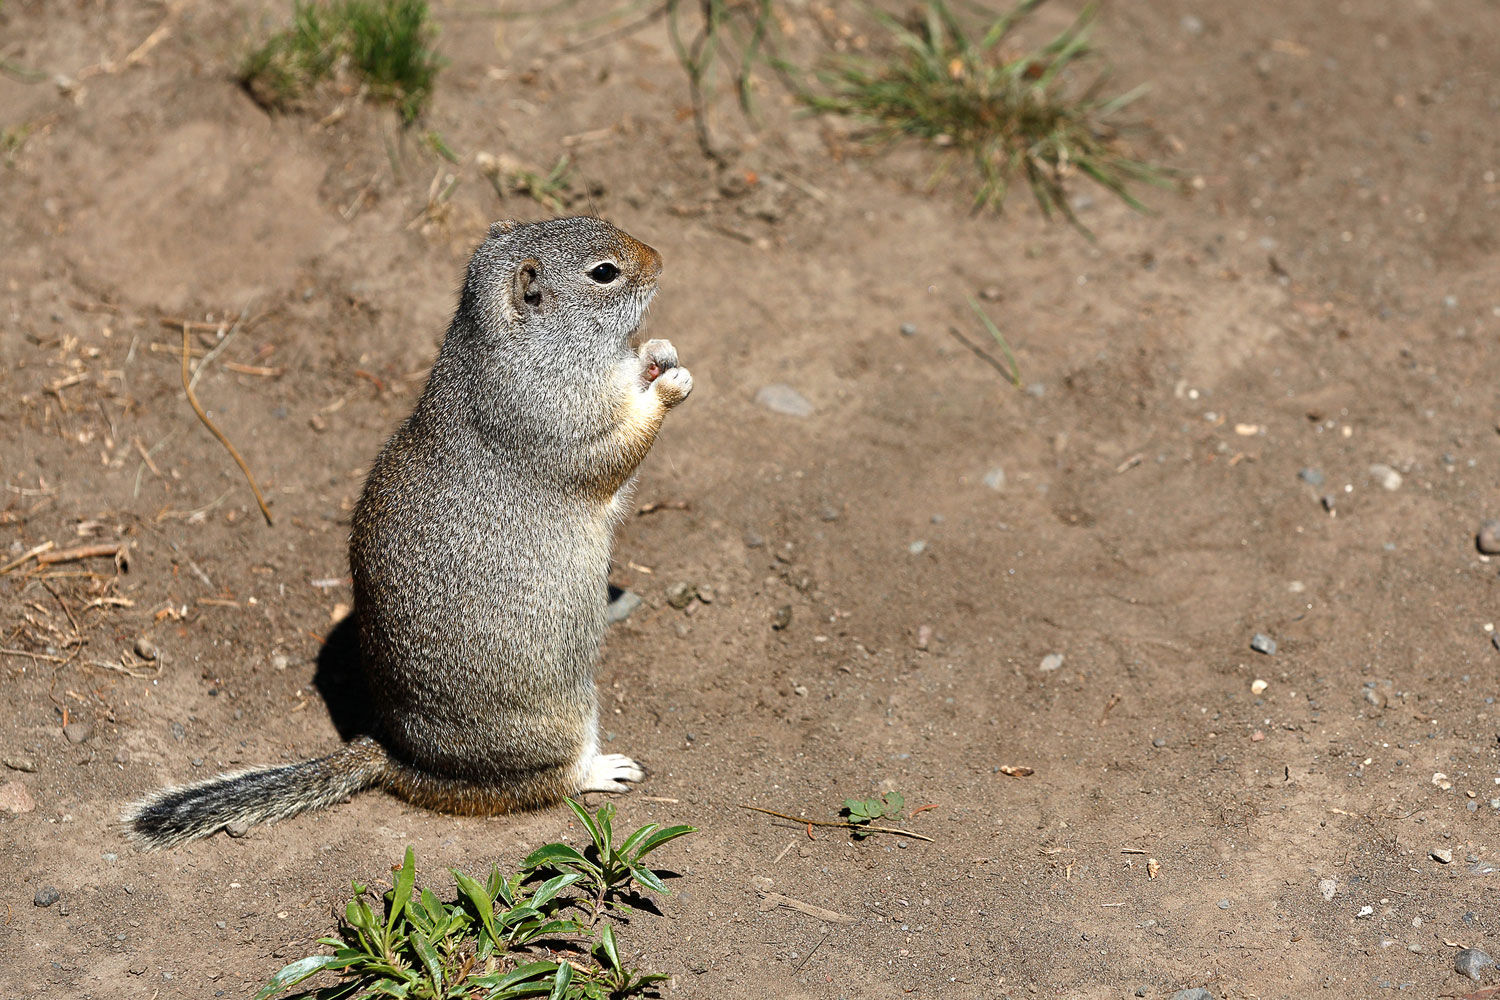 While technically not slang, many Montanans refer this critter as a gopher even though it is really a ground squirrel. But please, whatever you do, don't correct them. They know they aren't technically gophers and they don't need to be corrected.